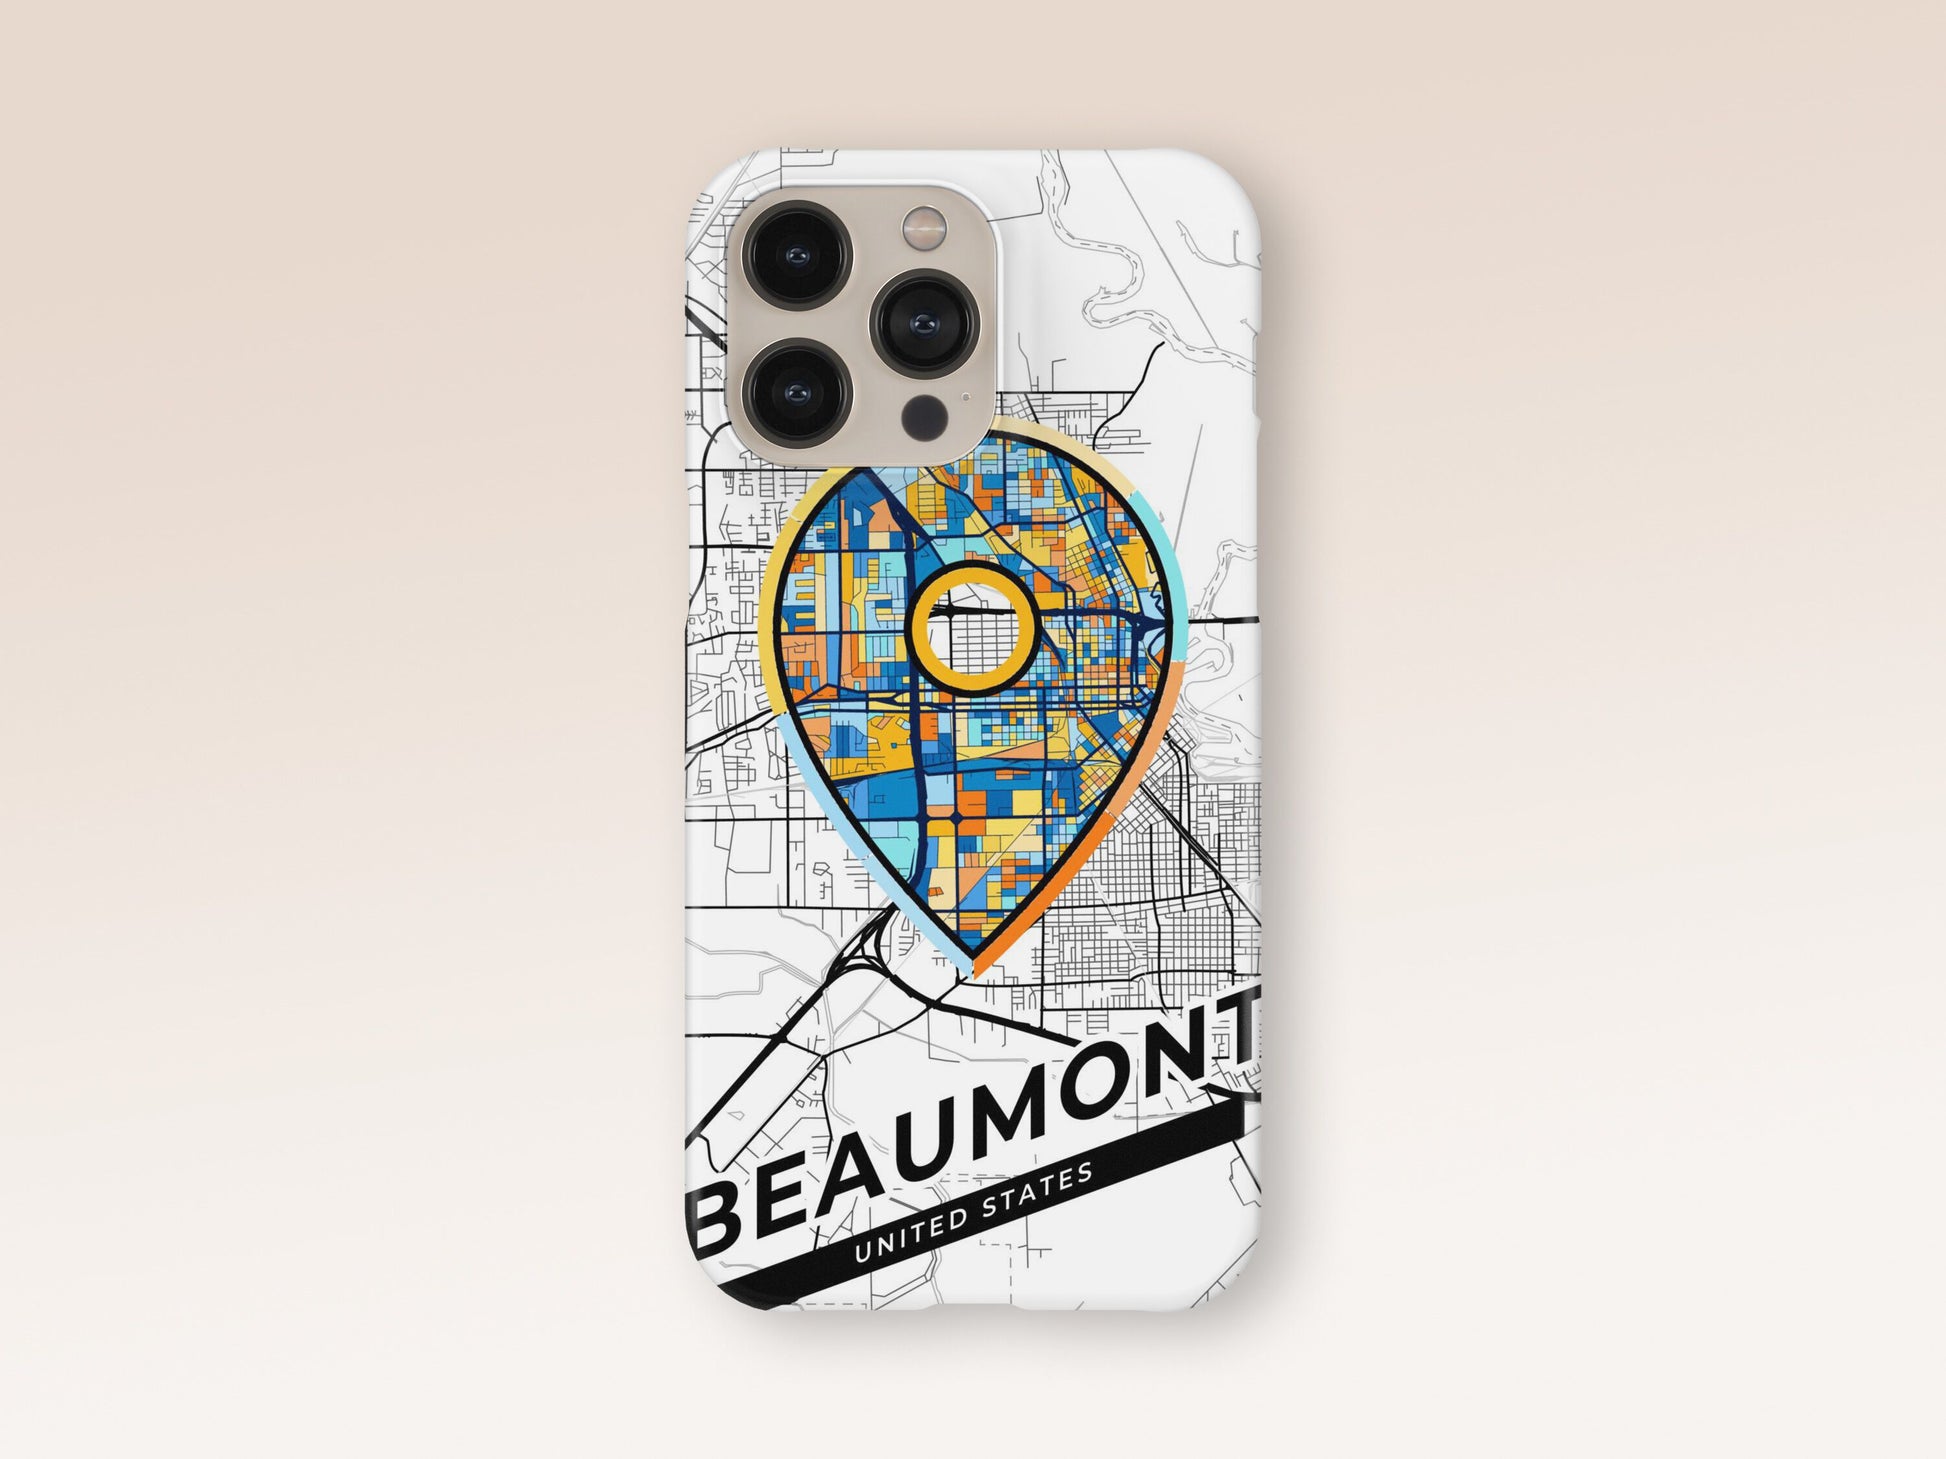 Beaumont Texas slim phone case with colorful icon. Birthday, wedding or housewarming gift. Couple match cases. 1